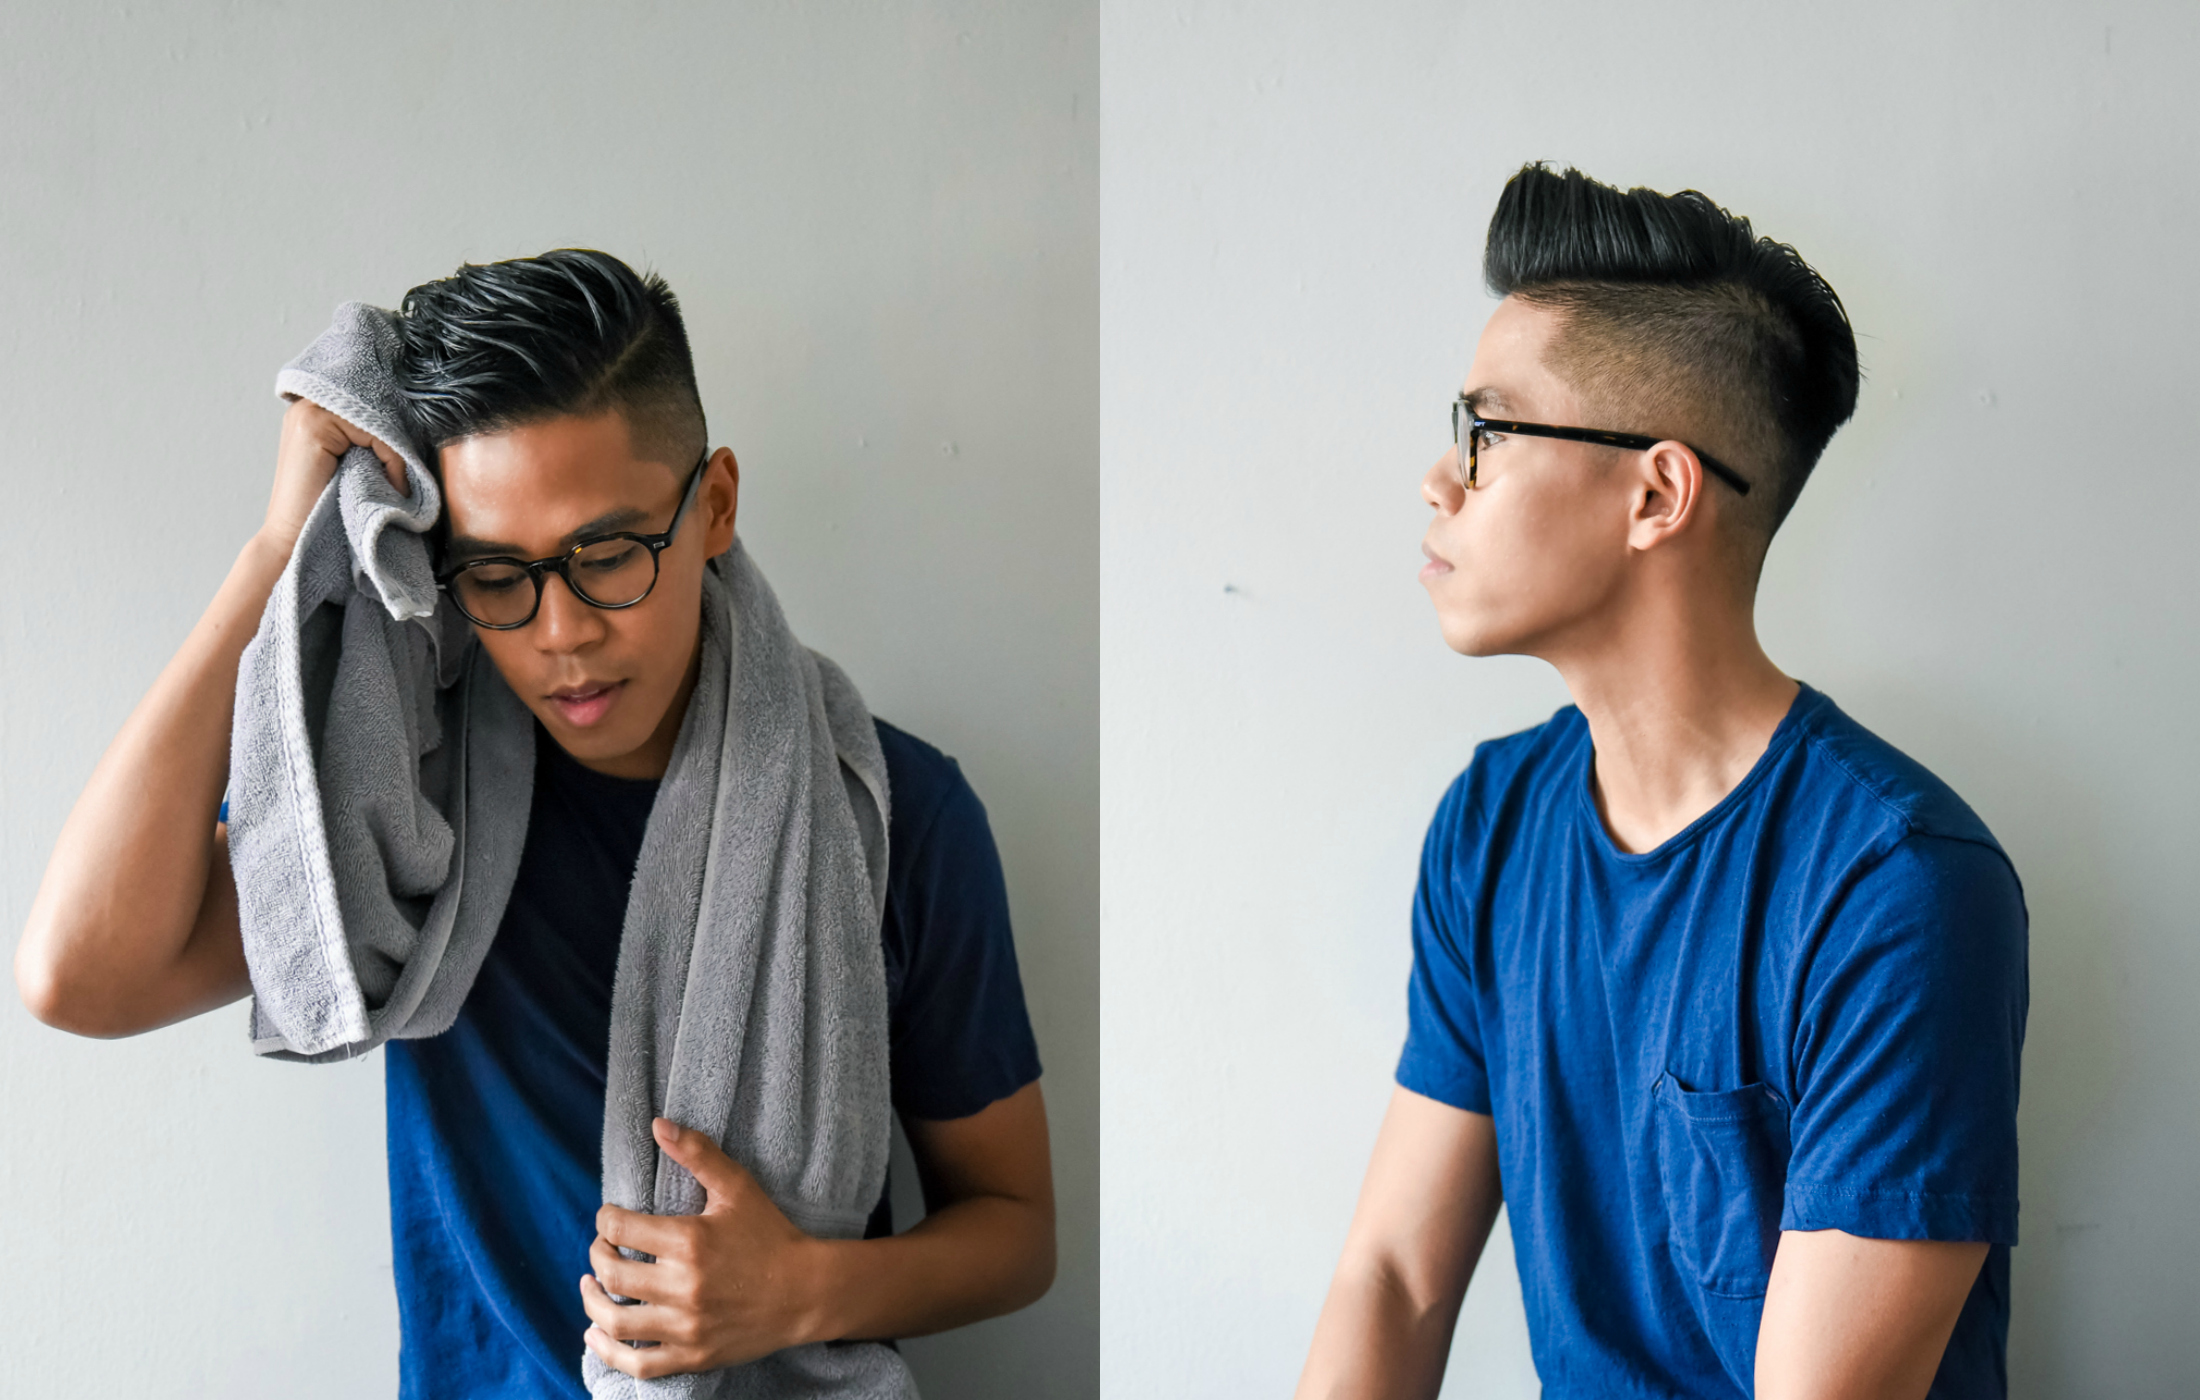 Men's Hair, Don't Care – oh_anthonio